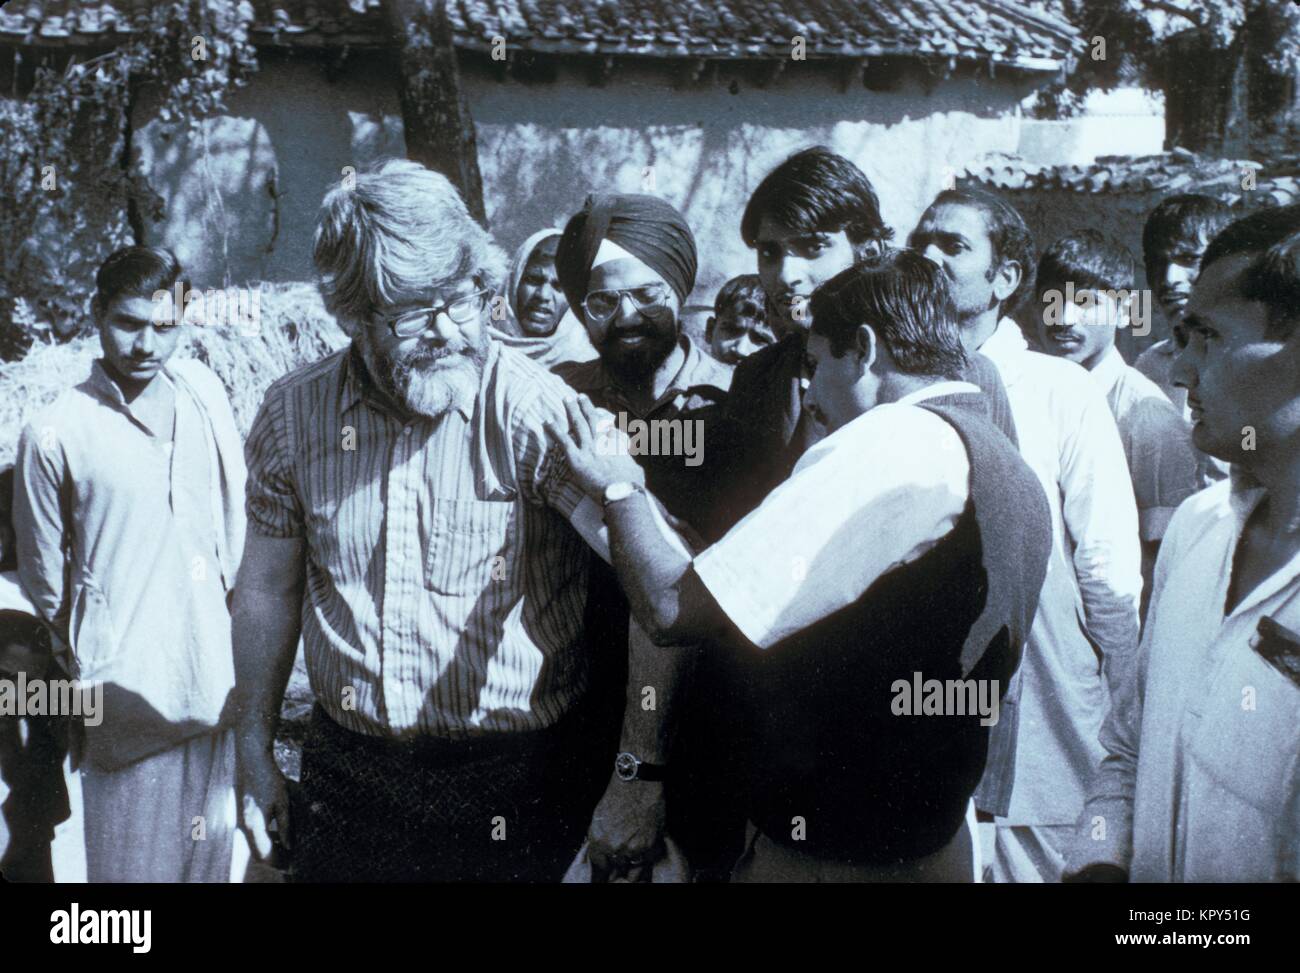 Physician Dr. A. Khan examines the scar from a successful smallpox vaccination on Dr. J. Donald Millar, a WHO Central Assessment Officer from the CDC, is seen, Bhojpur District, Bihar, India, 1975. Image courtesy CDC/Dr. J. D. Millar. Stock Photo